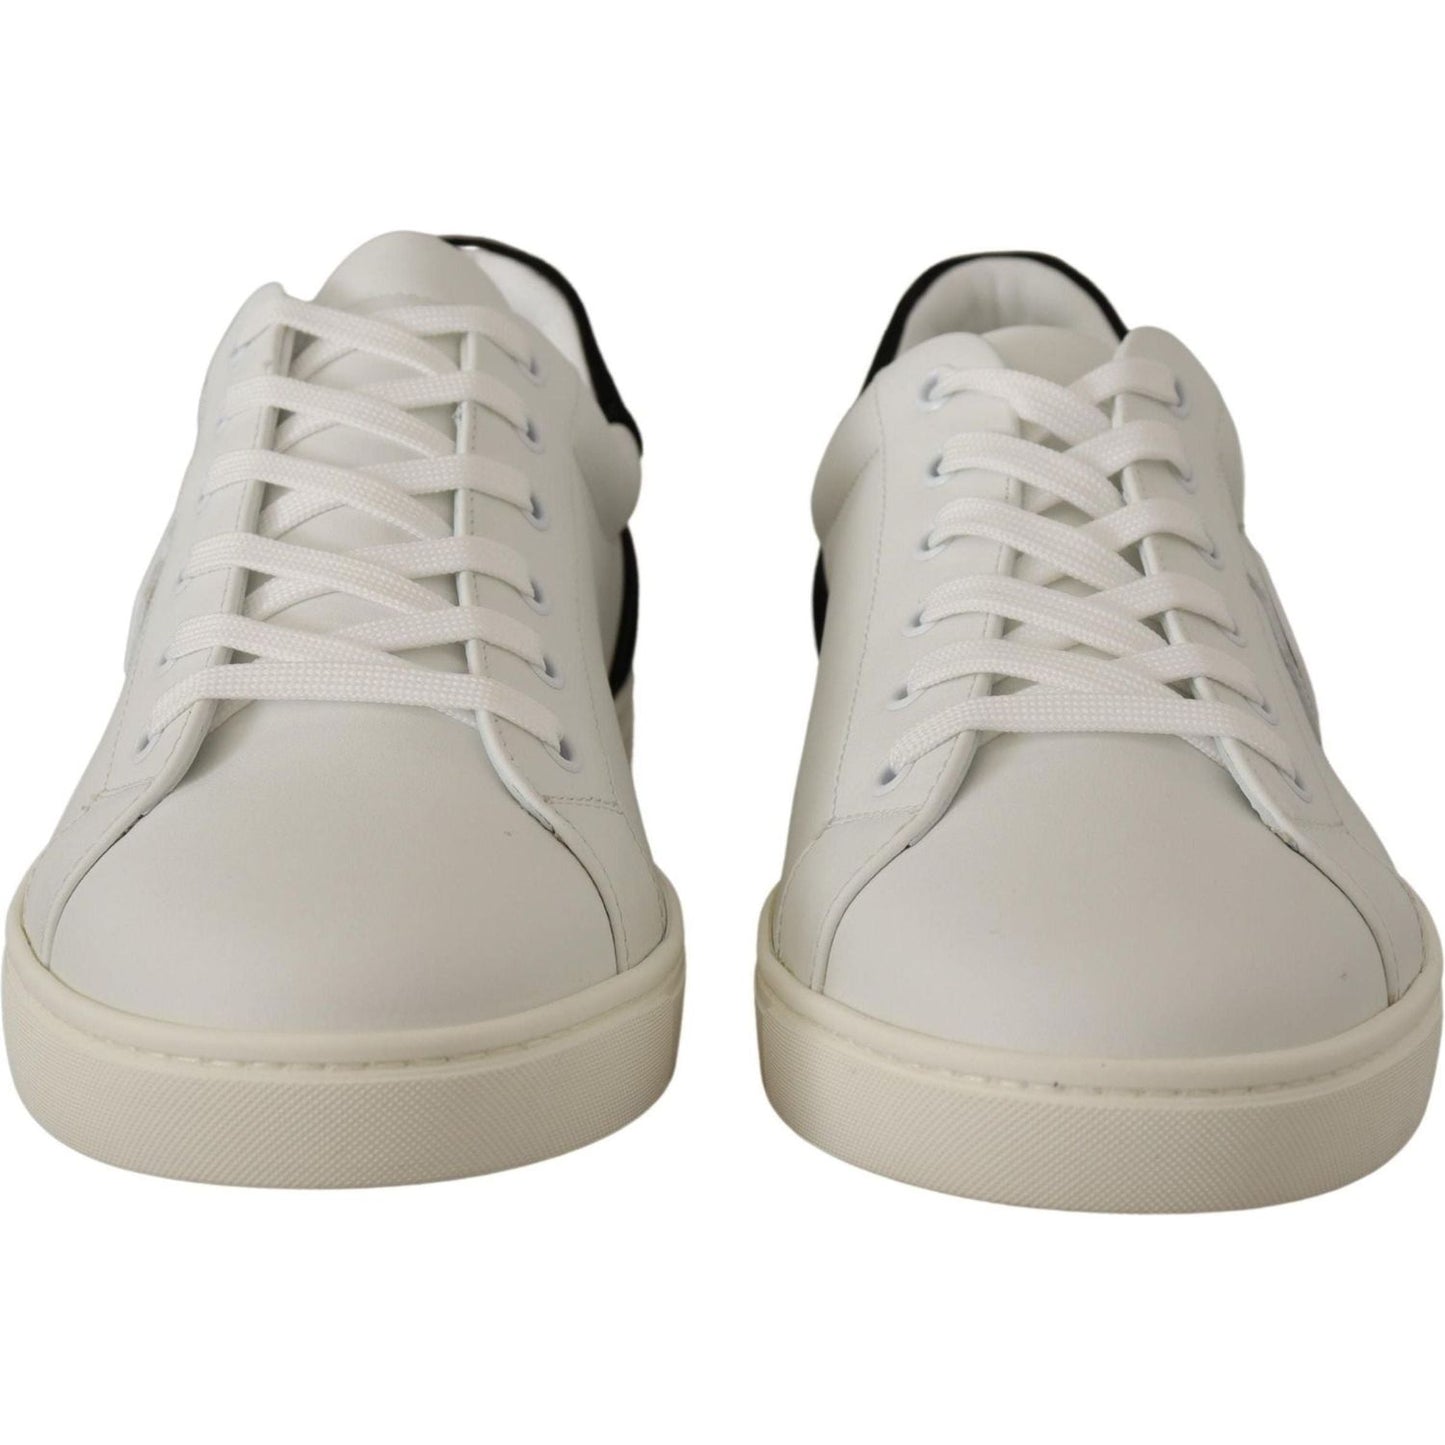 Dolce & Gabbana | White Suede Leather Low Tops Sneakers  | McRichard Designer Brands